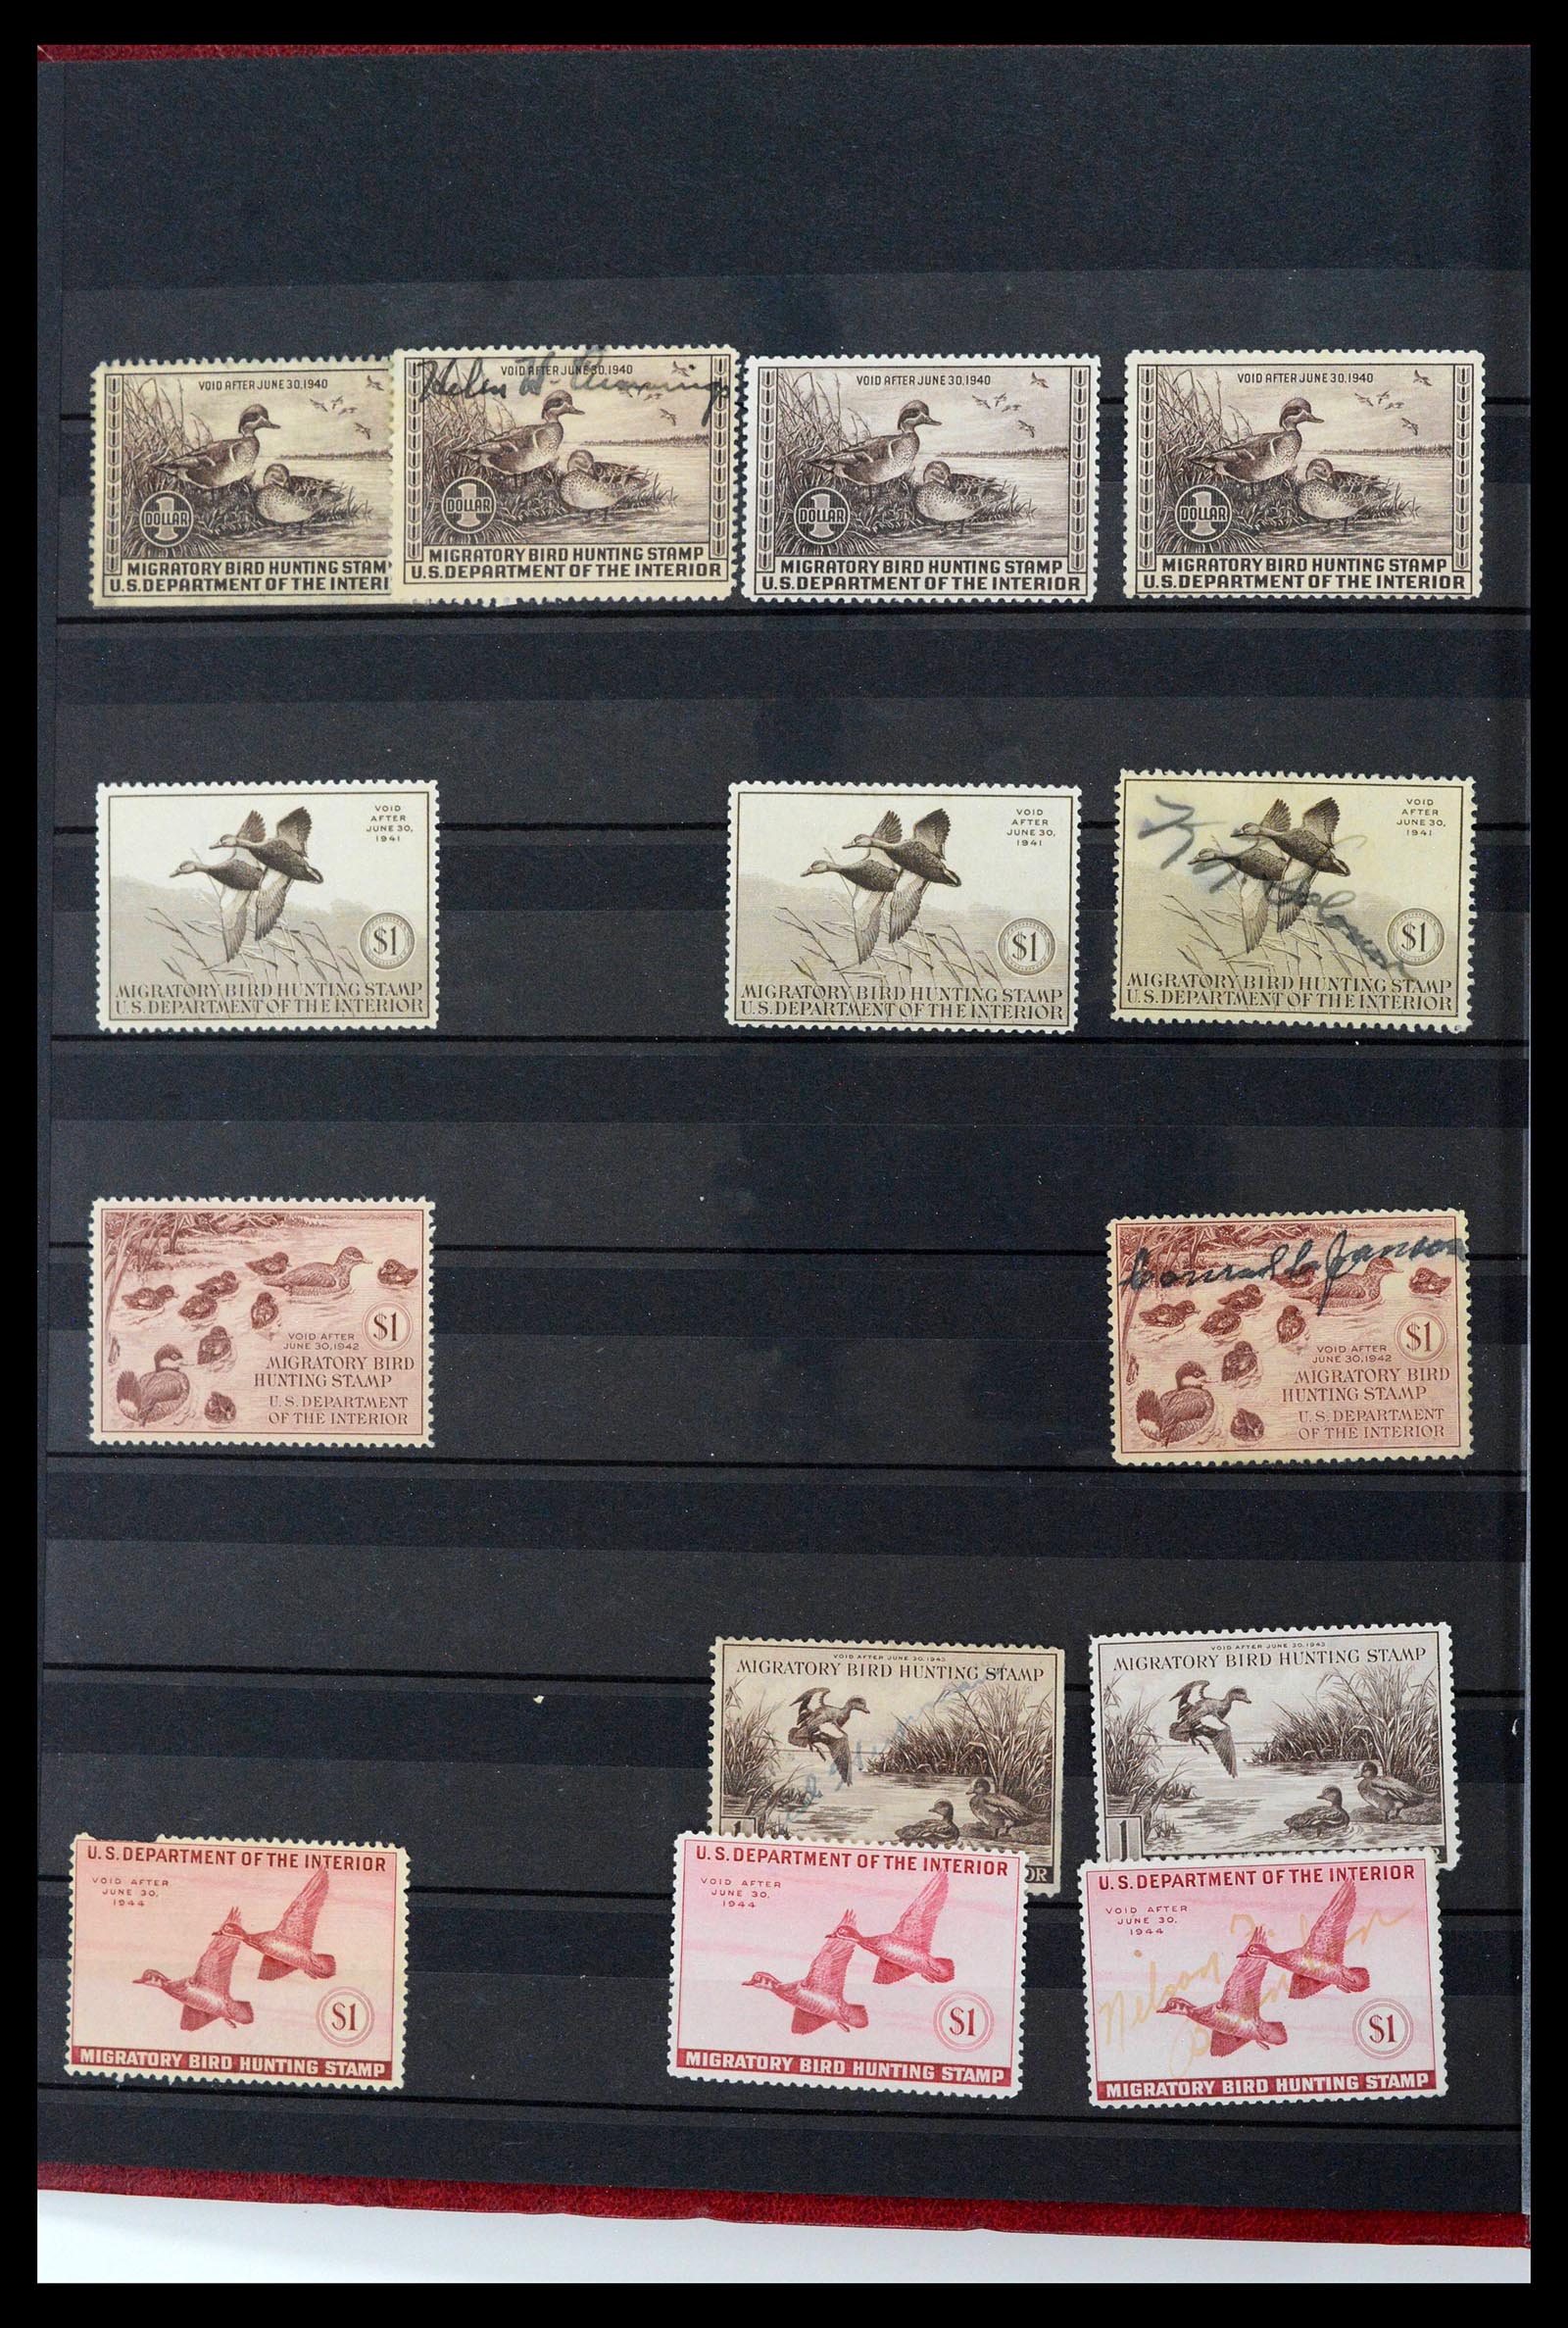 39426 0002 - Stamp collection 39426 USA duckstamps 1934-2007.